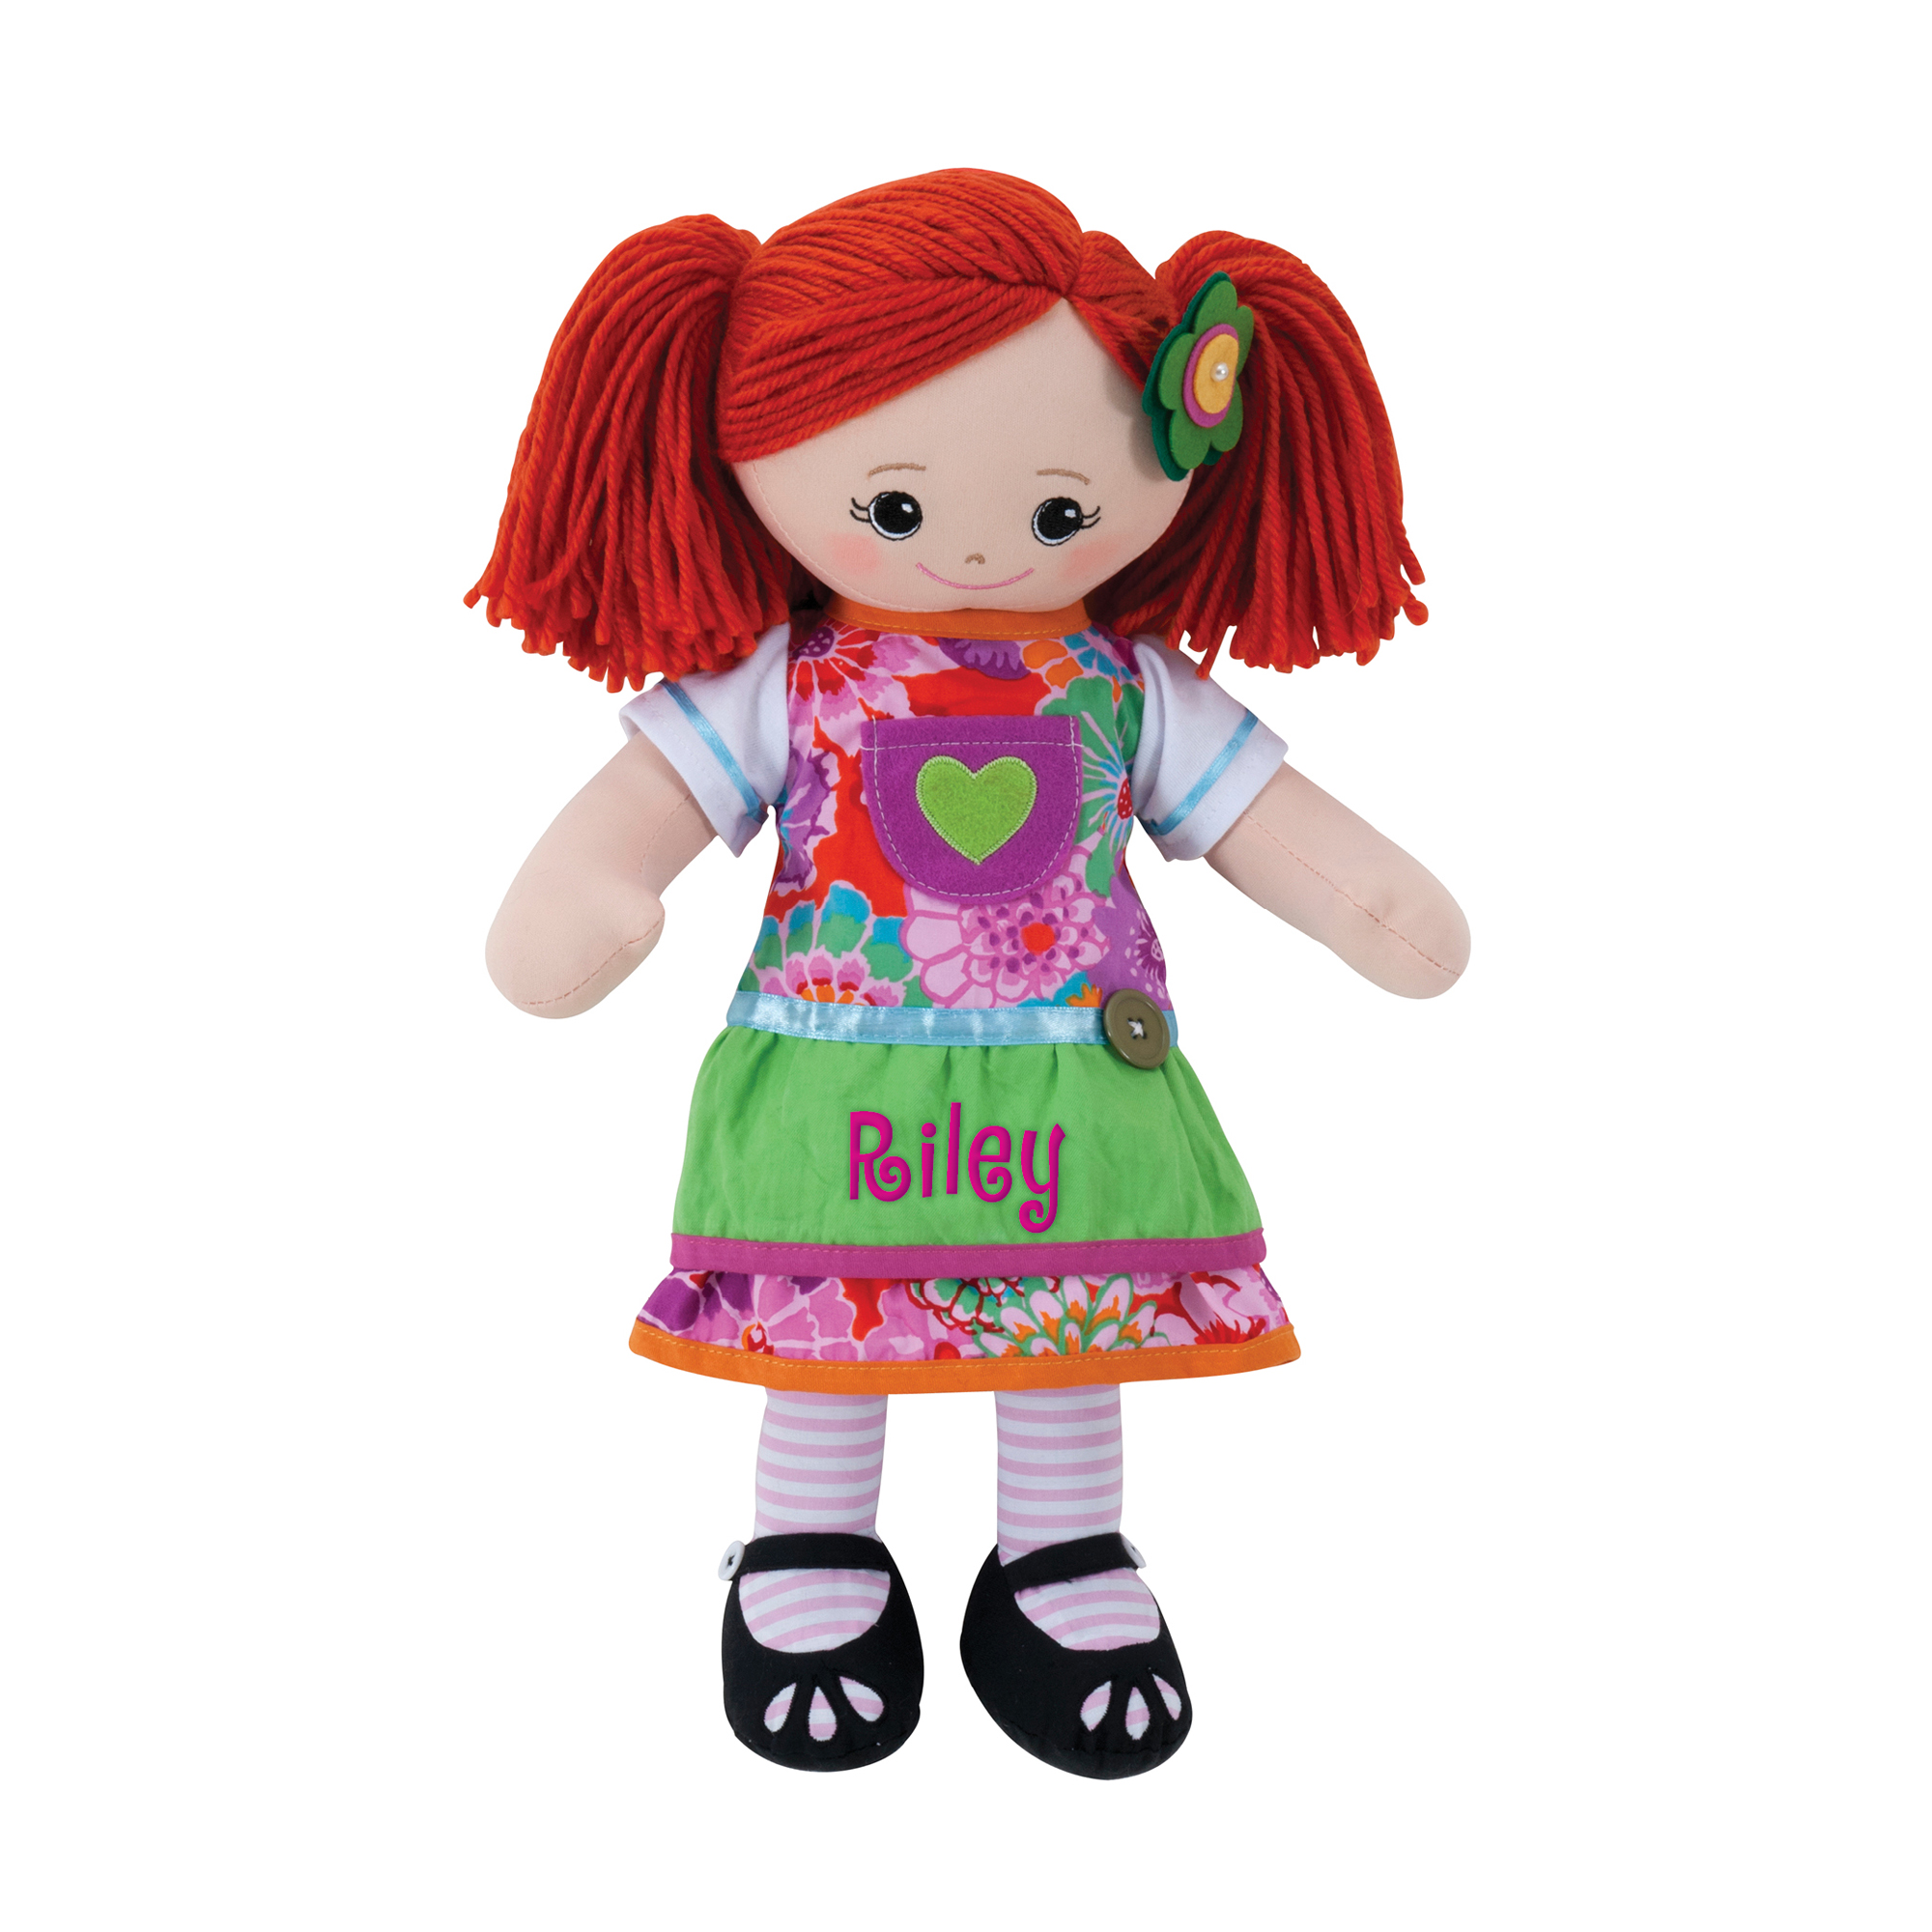 Personalized Red Head Doll with Green Apron and Hair Clip